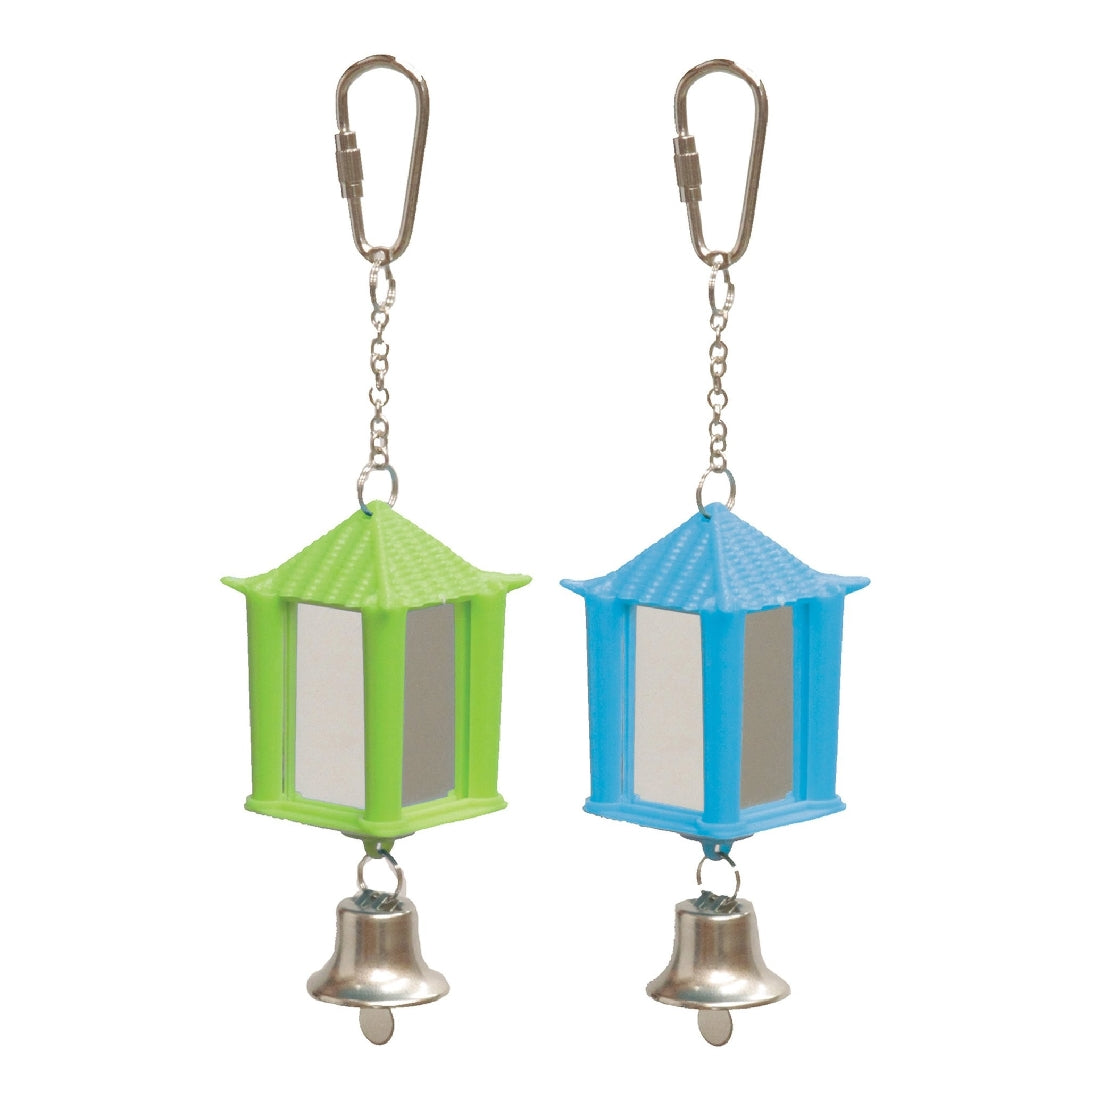 Two hanging bird toys, one green, one blue, with bells.